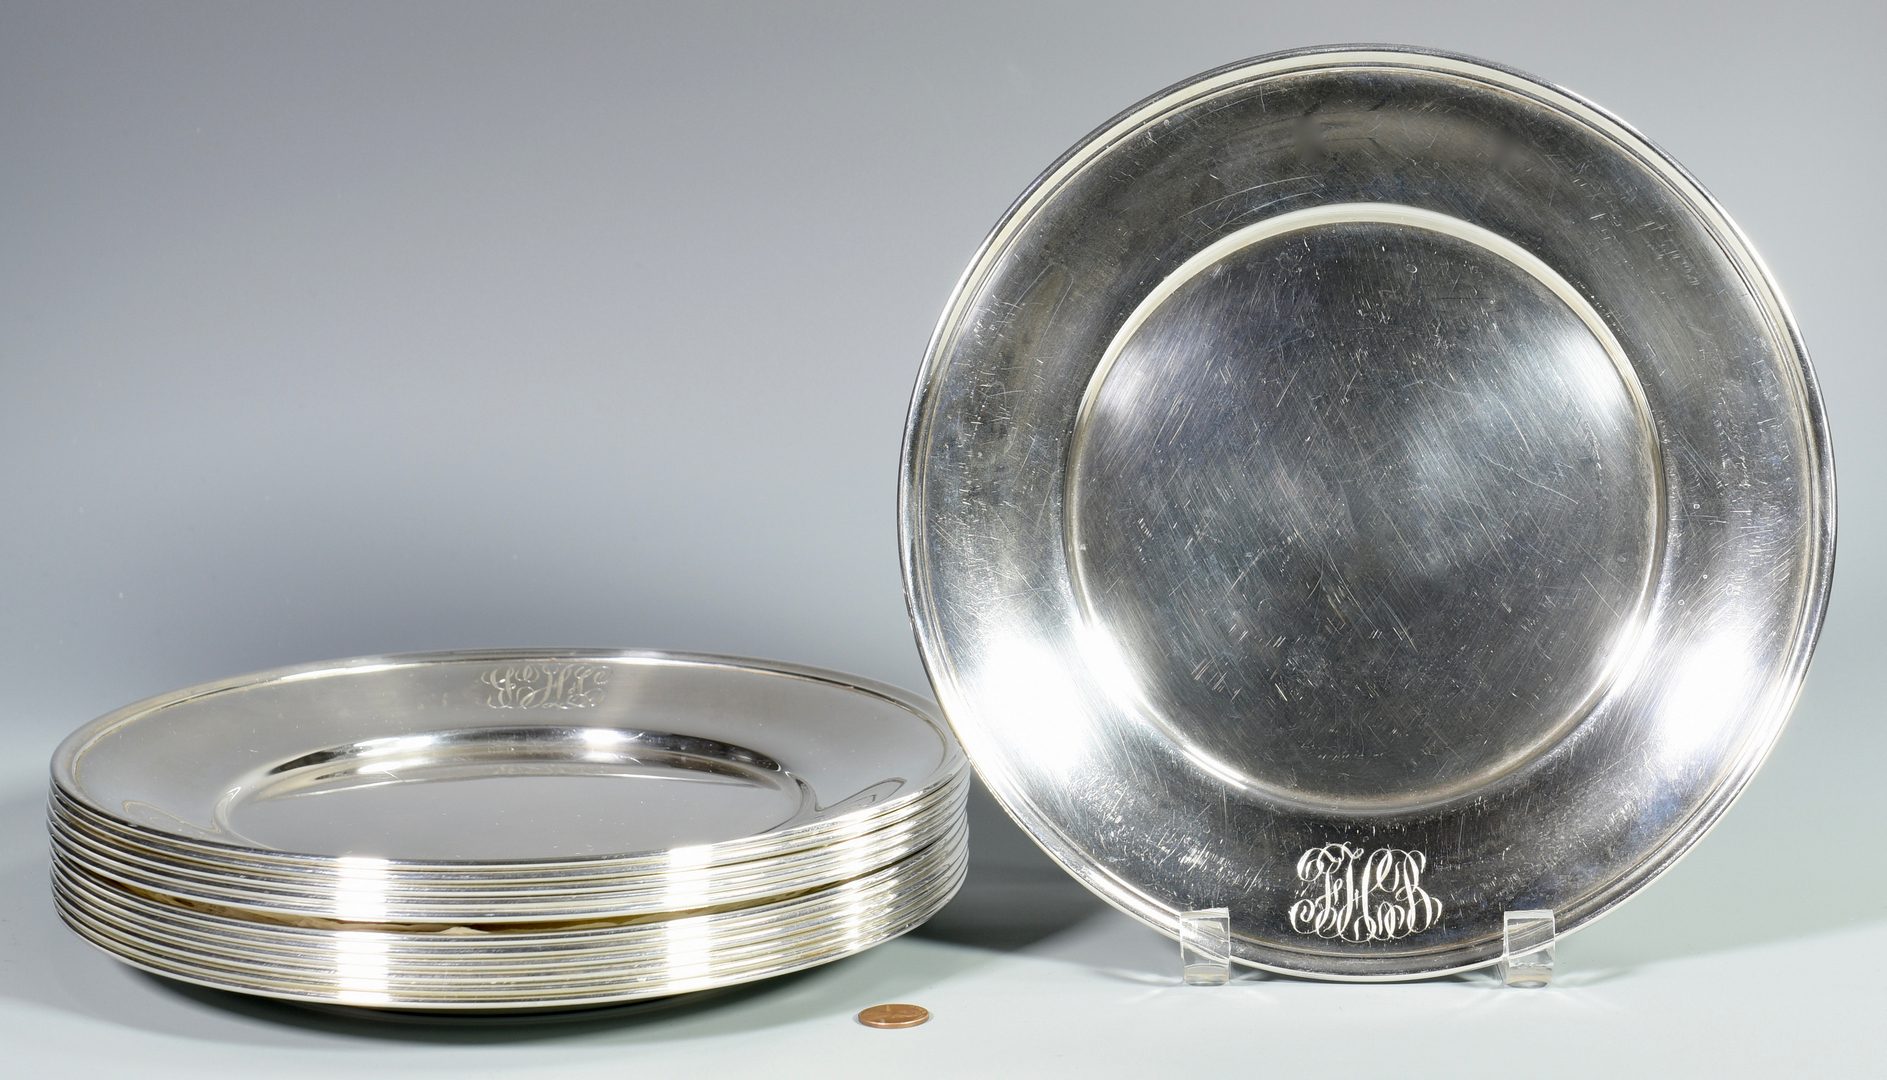 Lot 54: 12 Whiting Sterling Silver Plates, Monogrammed